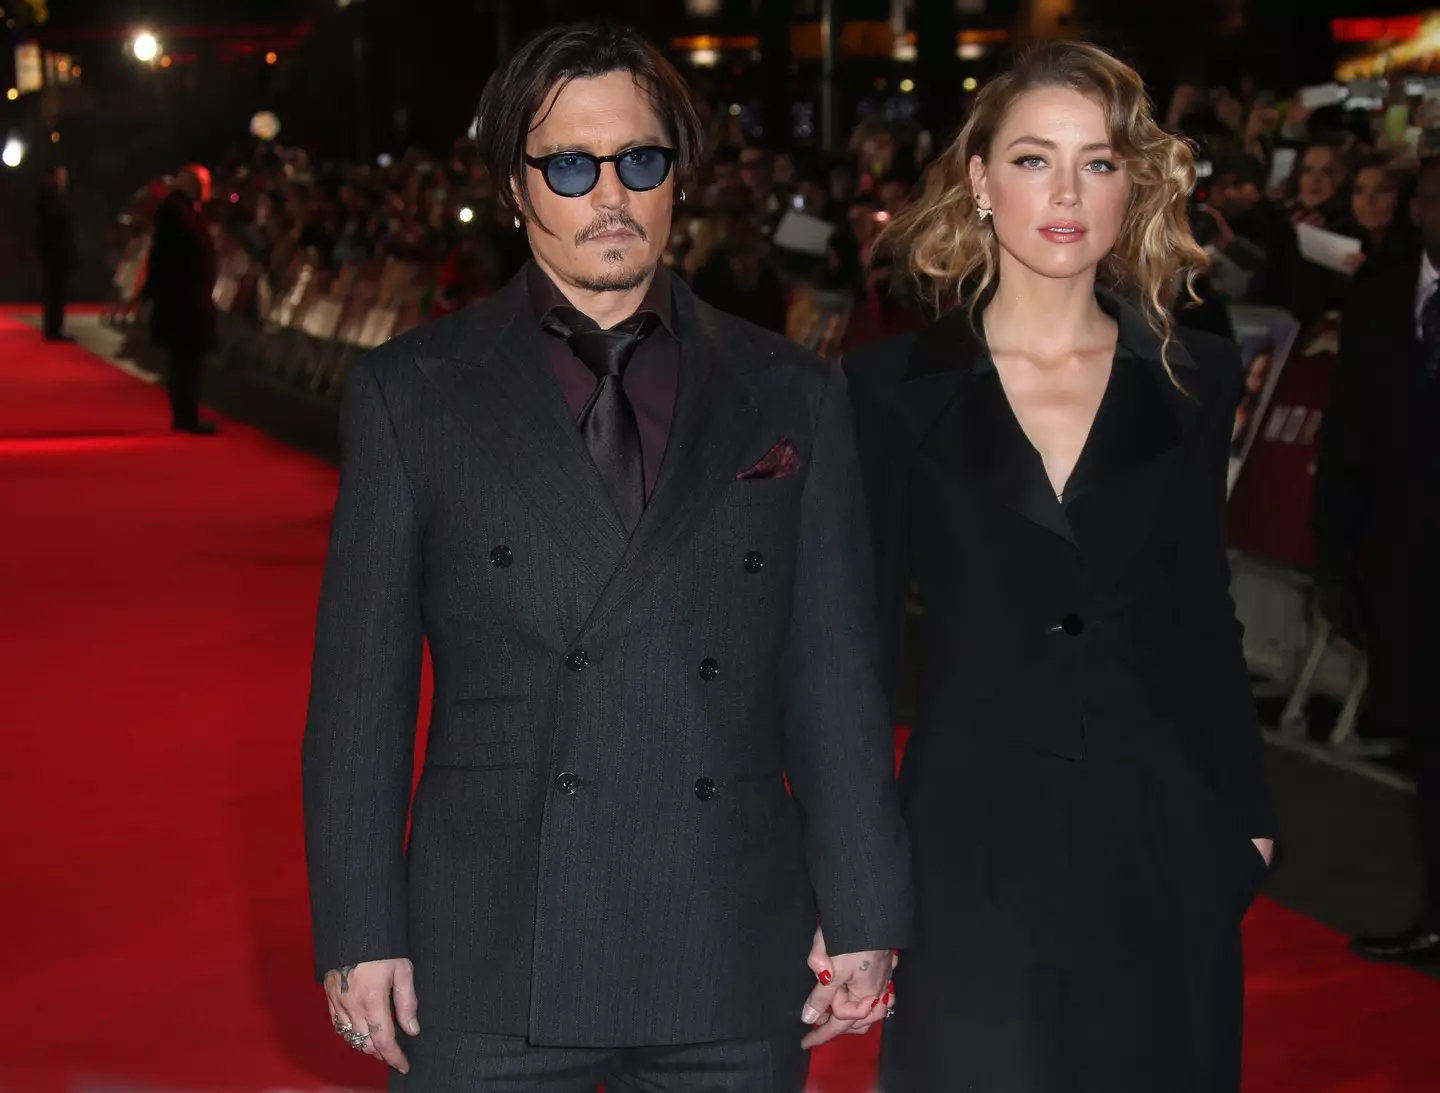 Johnny Depp and Amber Heard were involved in a bitter defamation trial.